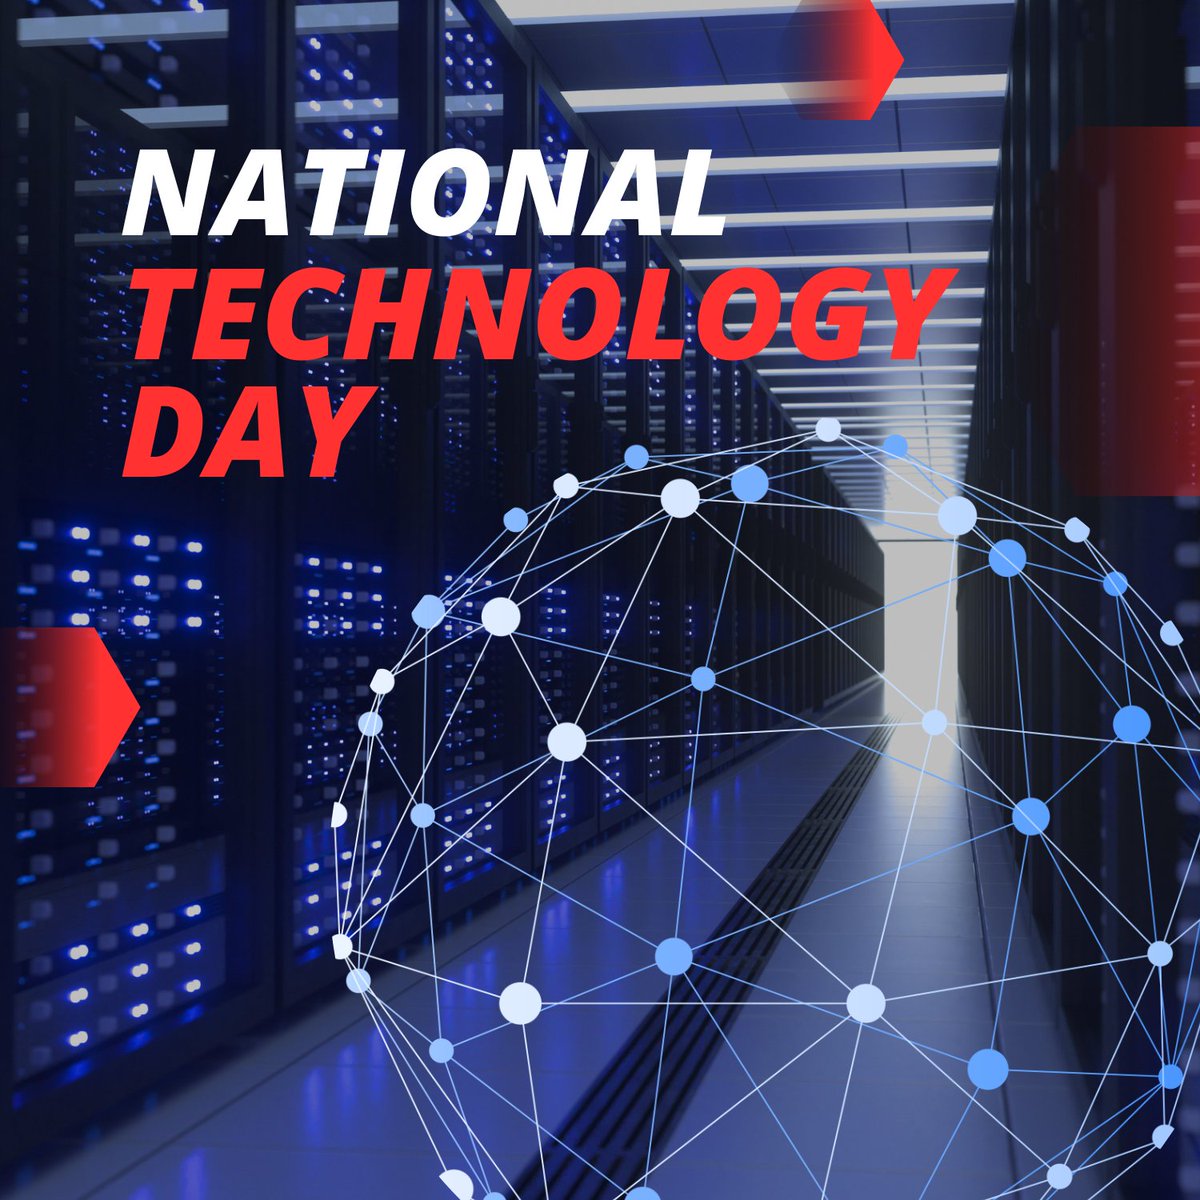 Happy National Technology Day! From ancient tools to modern gadgets, technology has always been a part of human progress. Let's embrace the future and continue to use tech for good! #NationalTechnologyDay